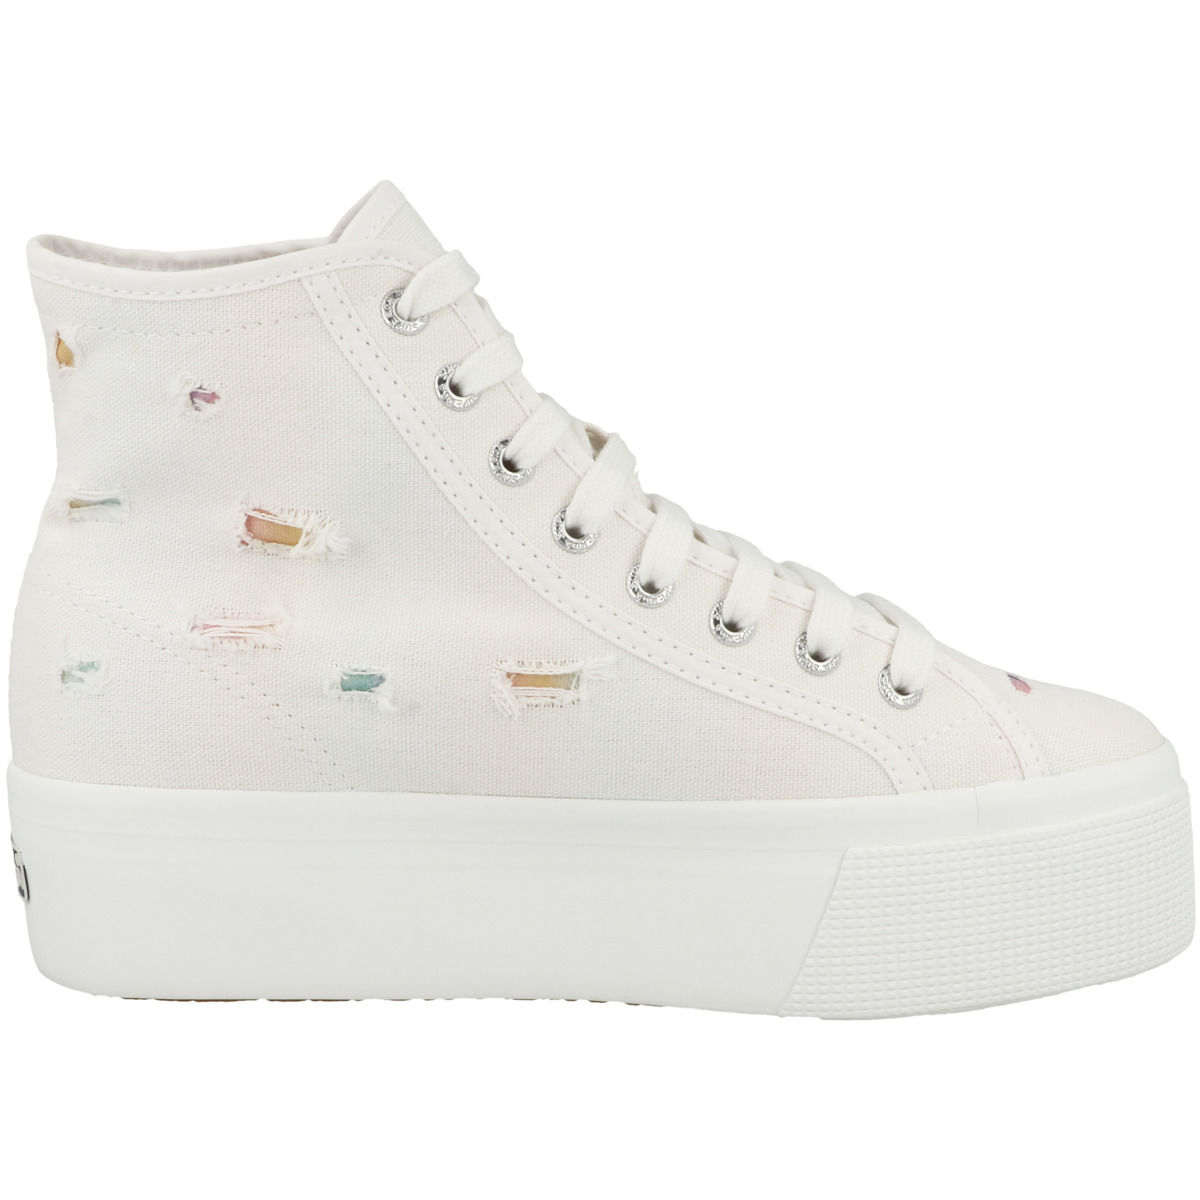 Superga 2708 Ripped Multicolor Cotton Sneaker weiss